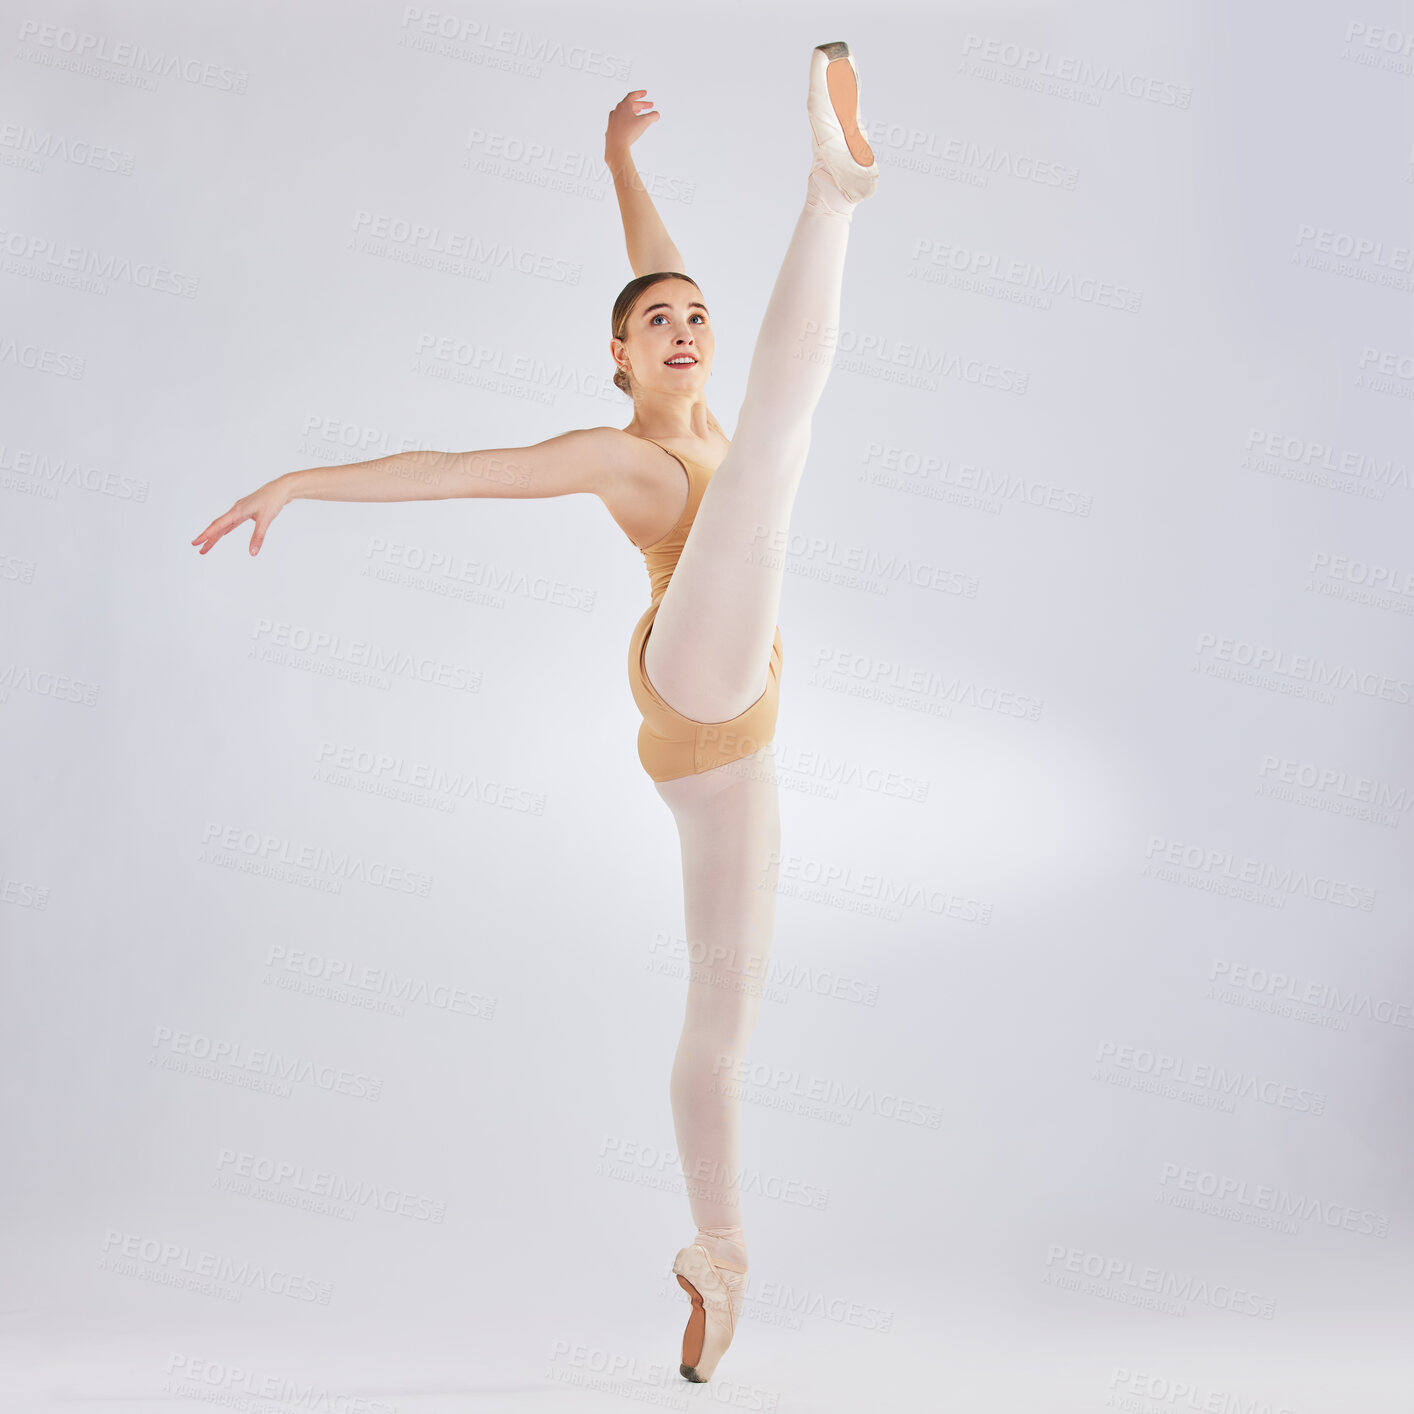 Buy stock photo Studio shot of a young woman performing a ballet recital against a grey background